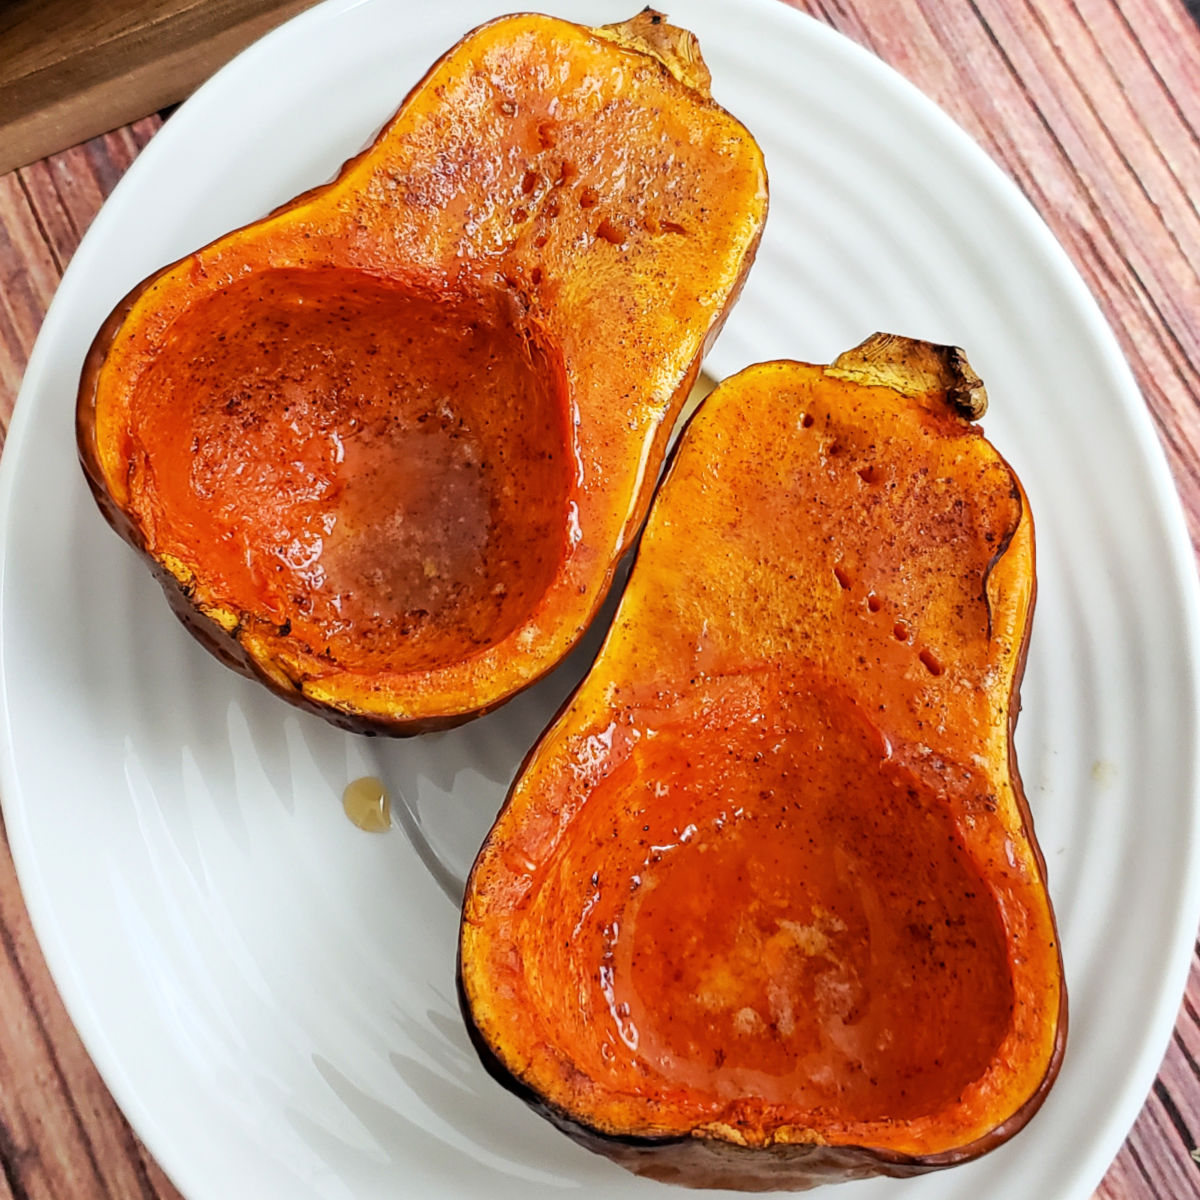 Two roasted honeynut squashes with maple syrup on a white platter.